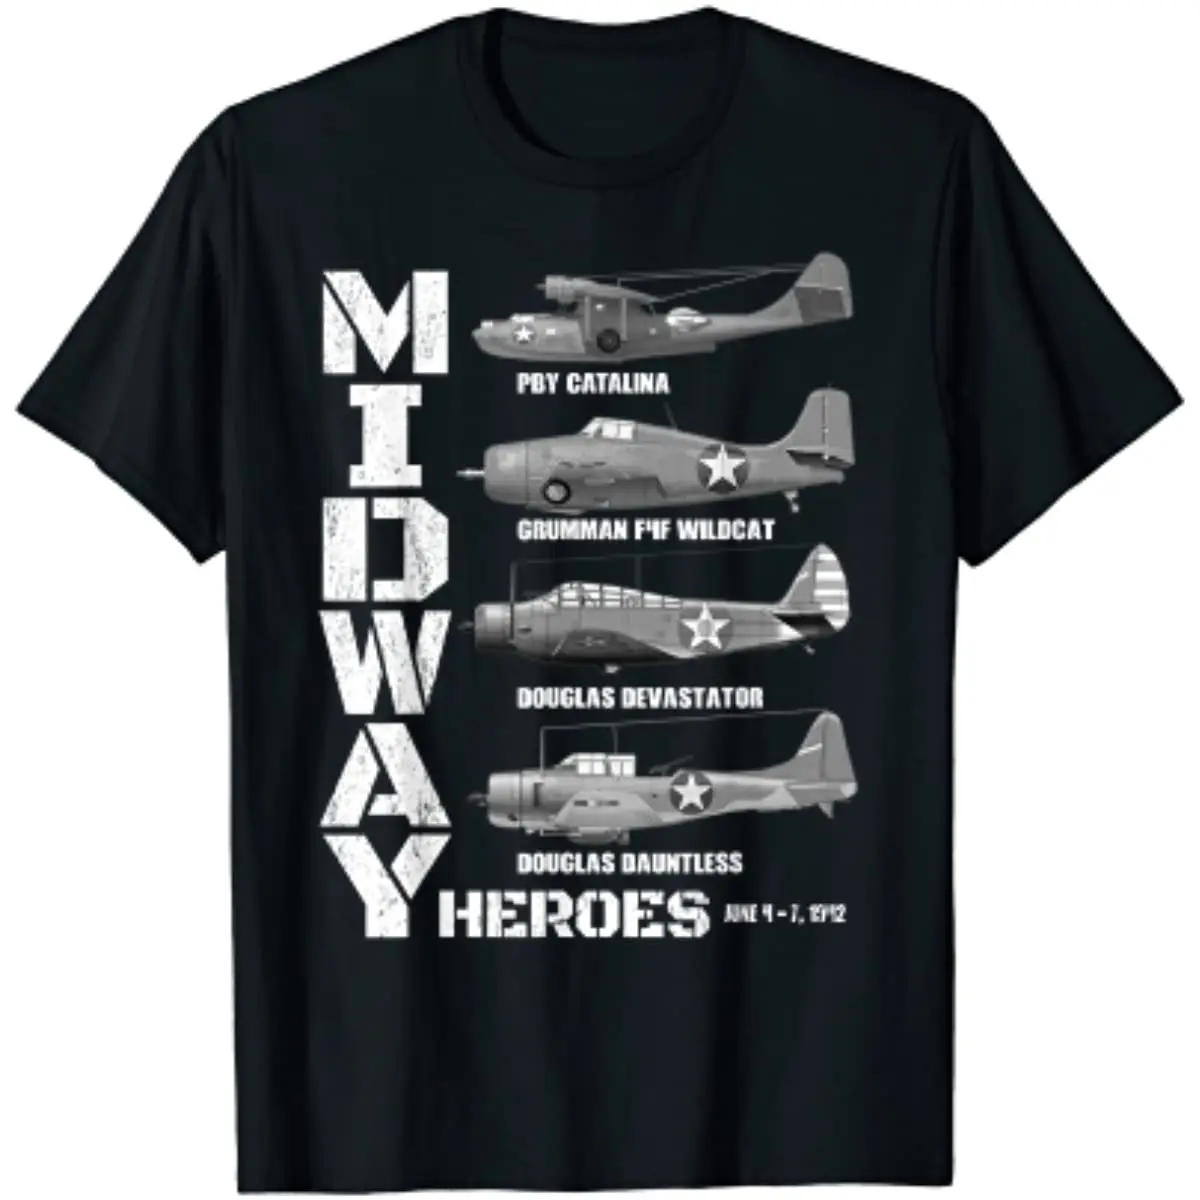 

The Battle of Midway Plane Spotting American WW2 Planes Men T-Shirt Short Sleeve Casual 100% Cotton O-Neck Summer Shirts